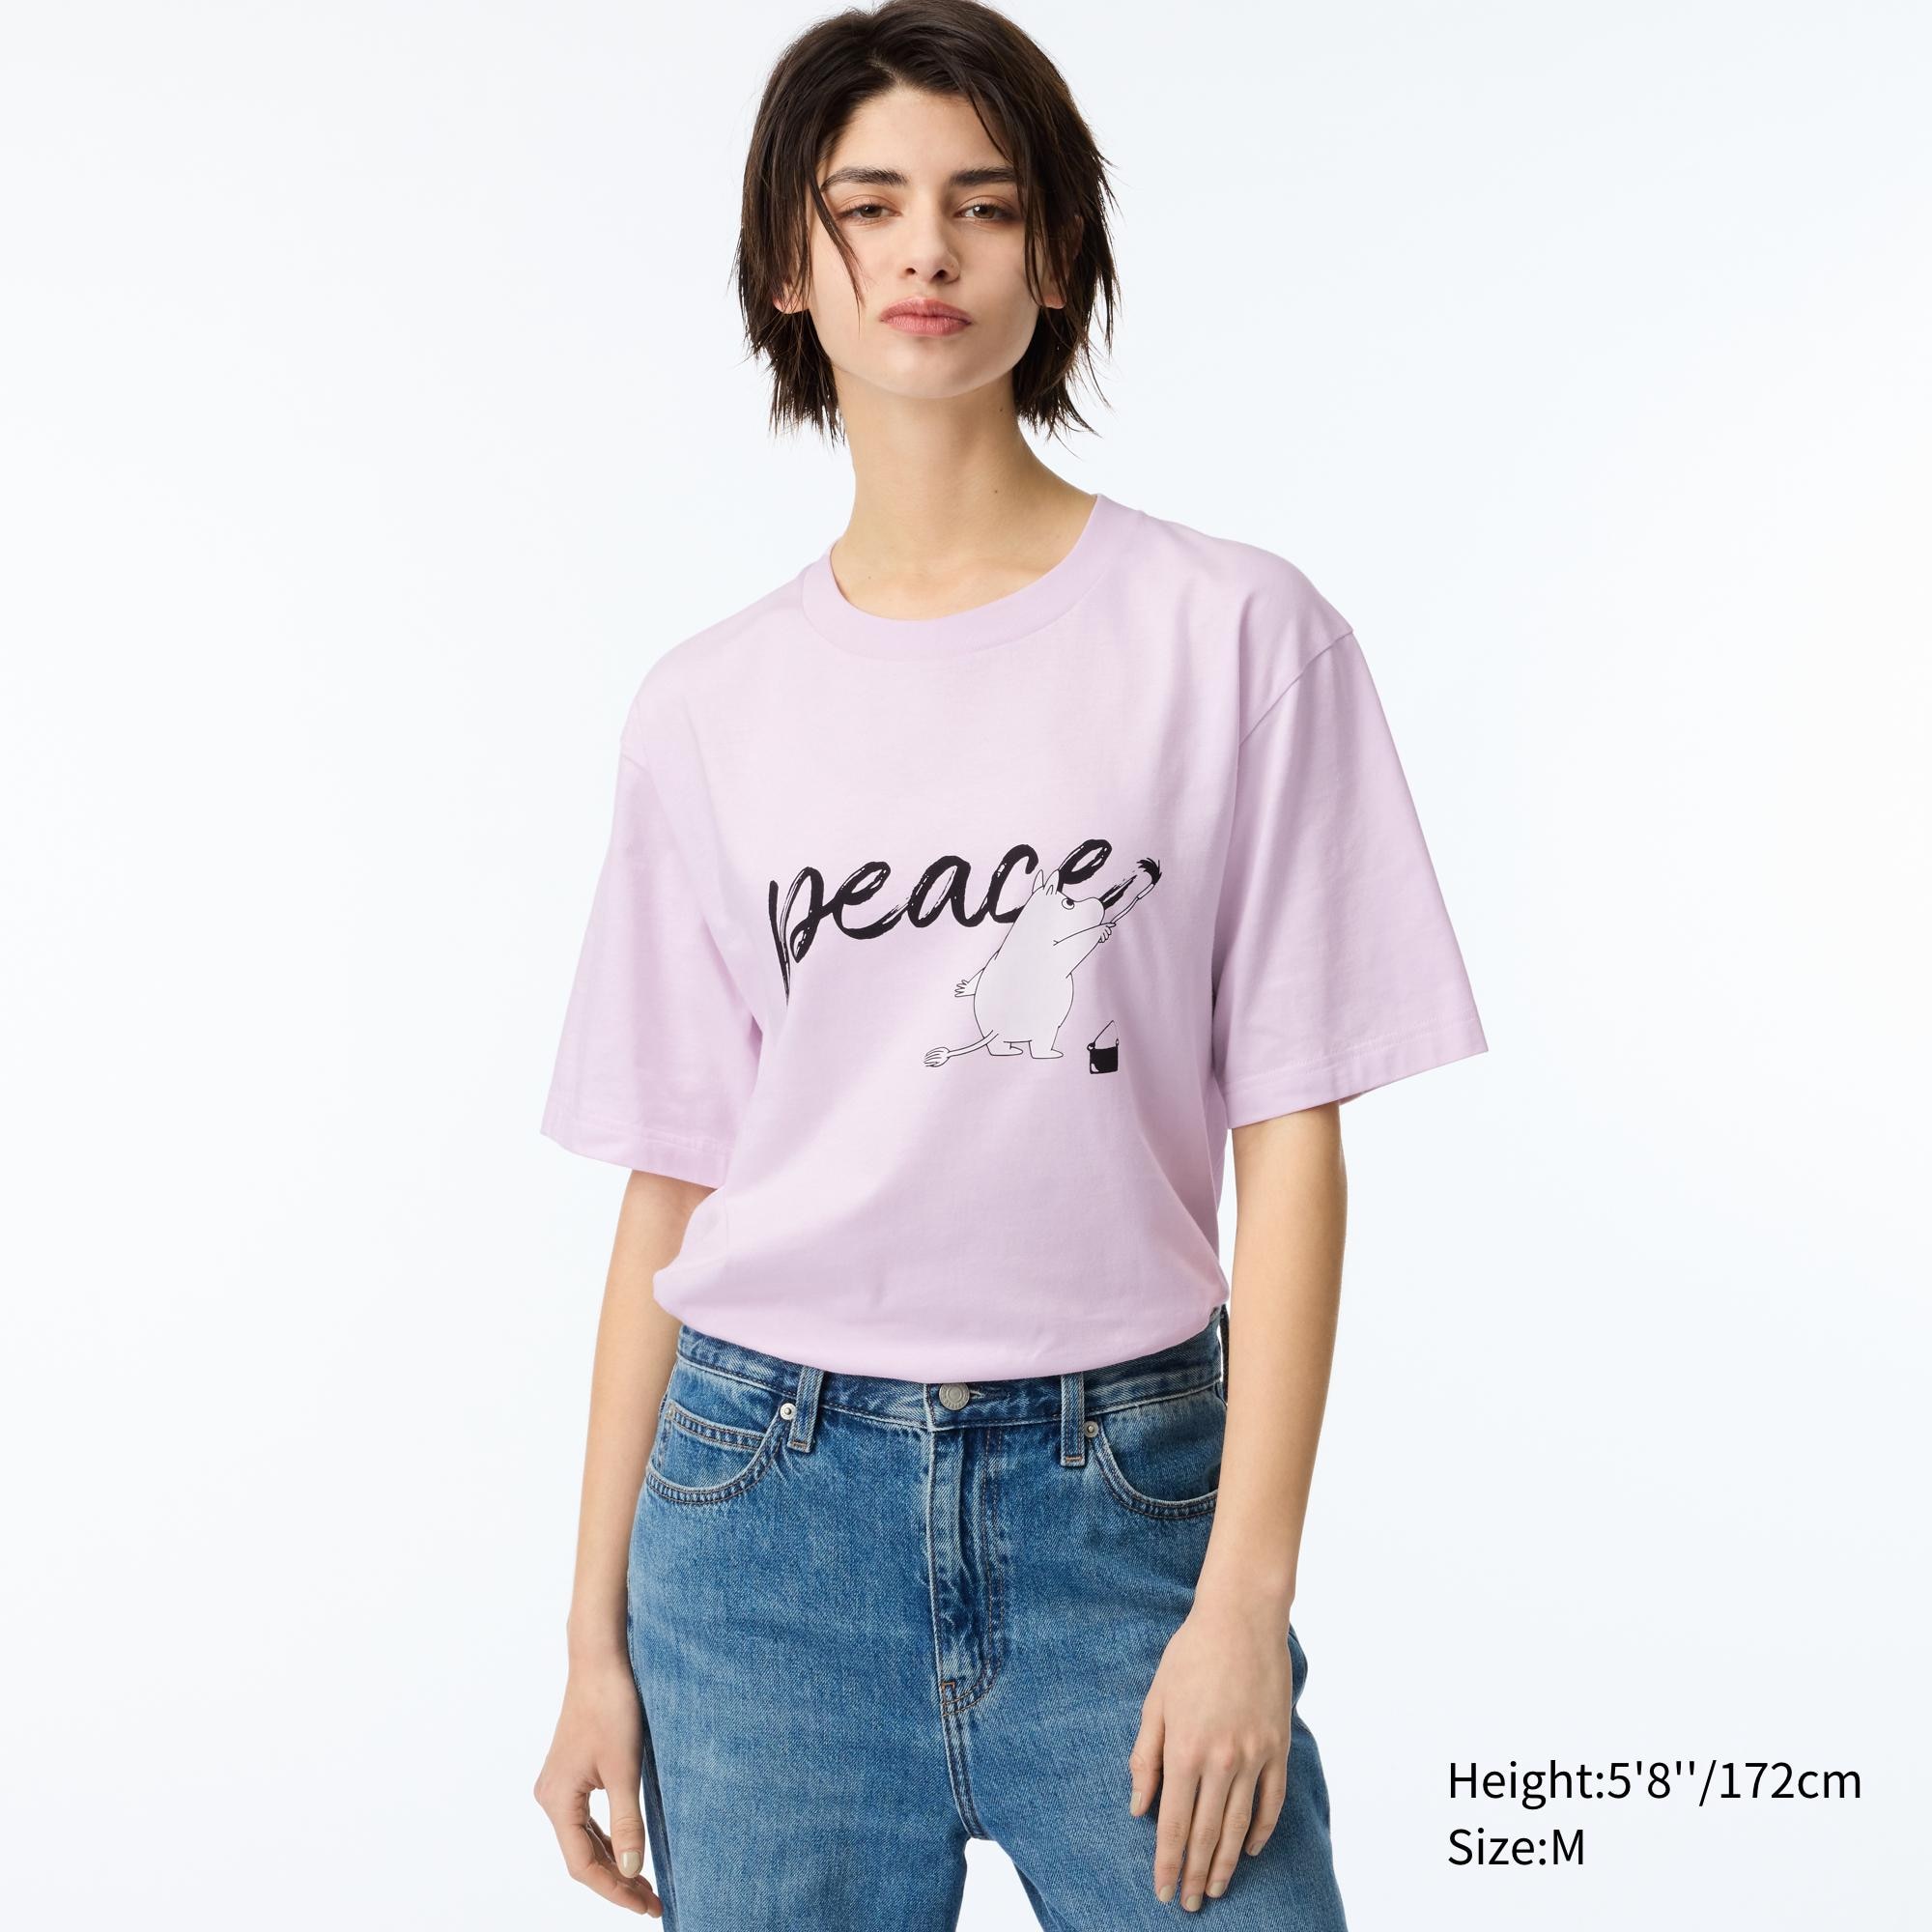 PEACE FOR ALL Short-Sleeve Graphic T-Shirt (MOOMIN)